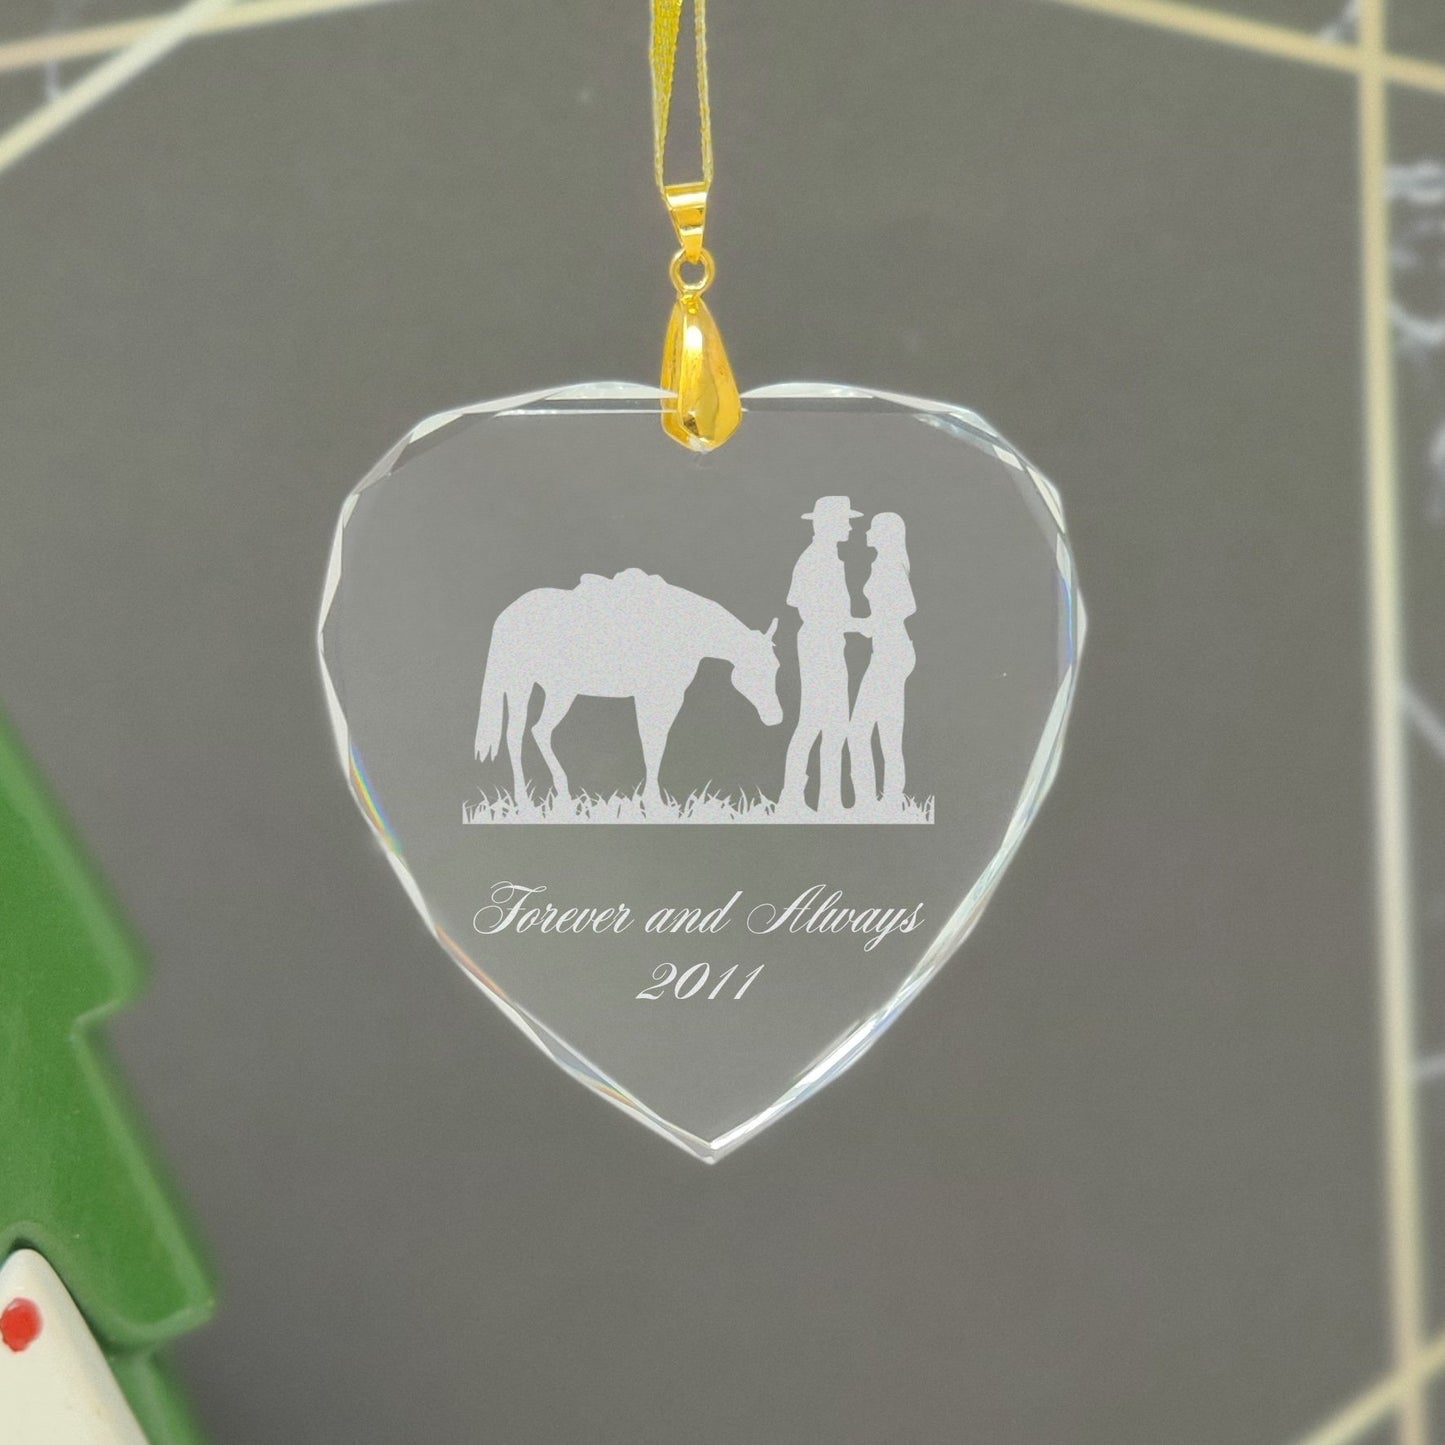 LaserGram Christmas Ornament, Rottweiler Dog, Personalized Engraving Included (Heart Shape)